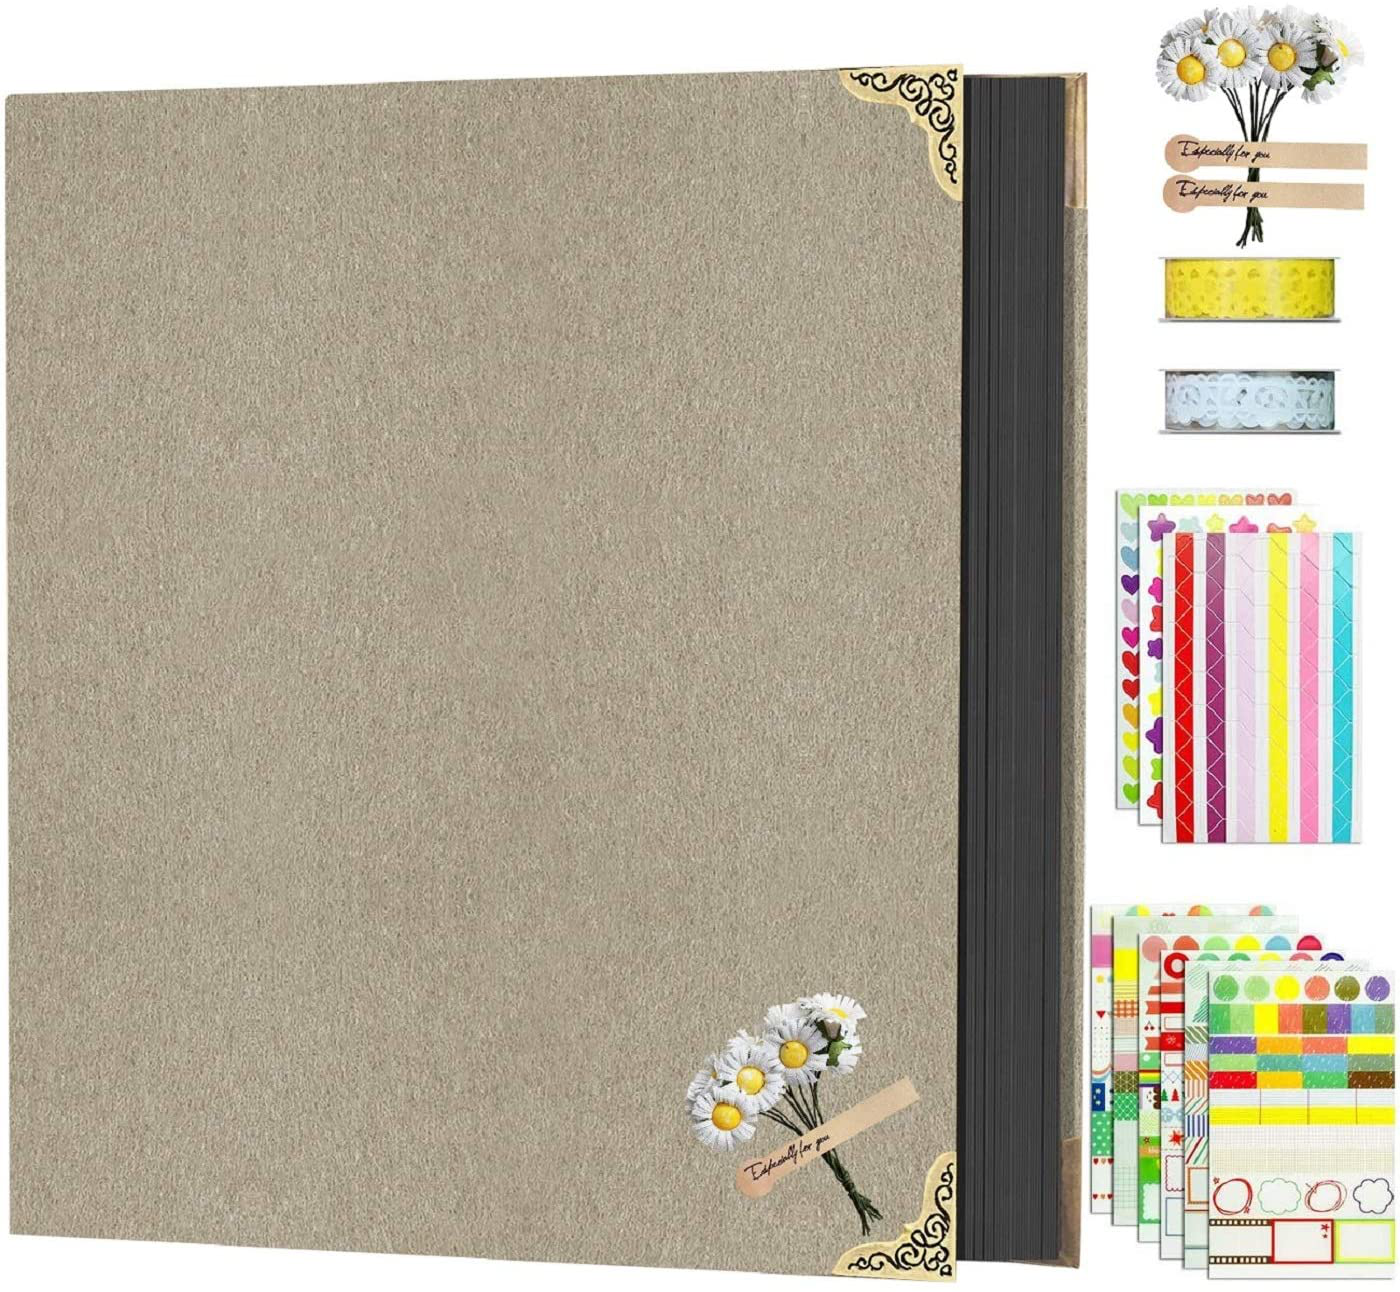 DIY Scrapbook Photo Album 8.5 X 11 Inch, Adkwse Hardcover 80 Pages Black Scrapbook Paper with Scrapbooking Kits Suitable for Anniversary, Travelling, Family, Graduation Gift